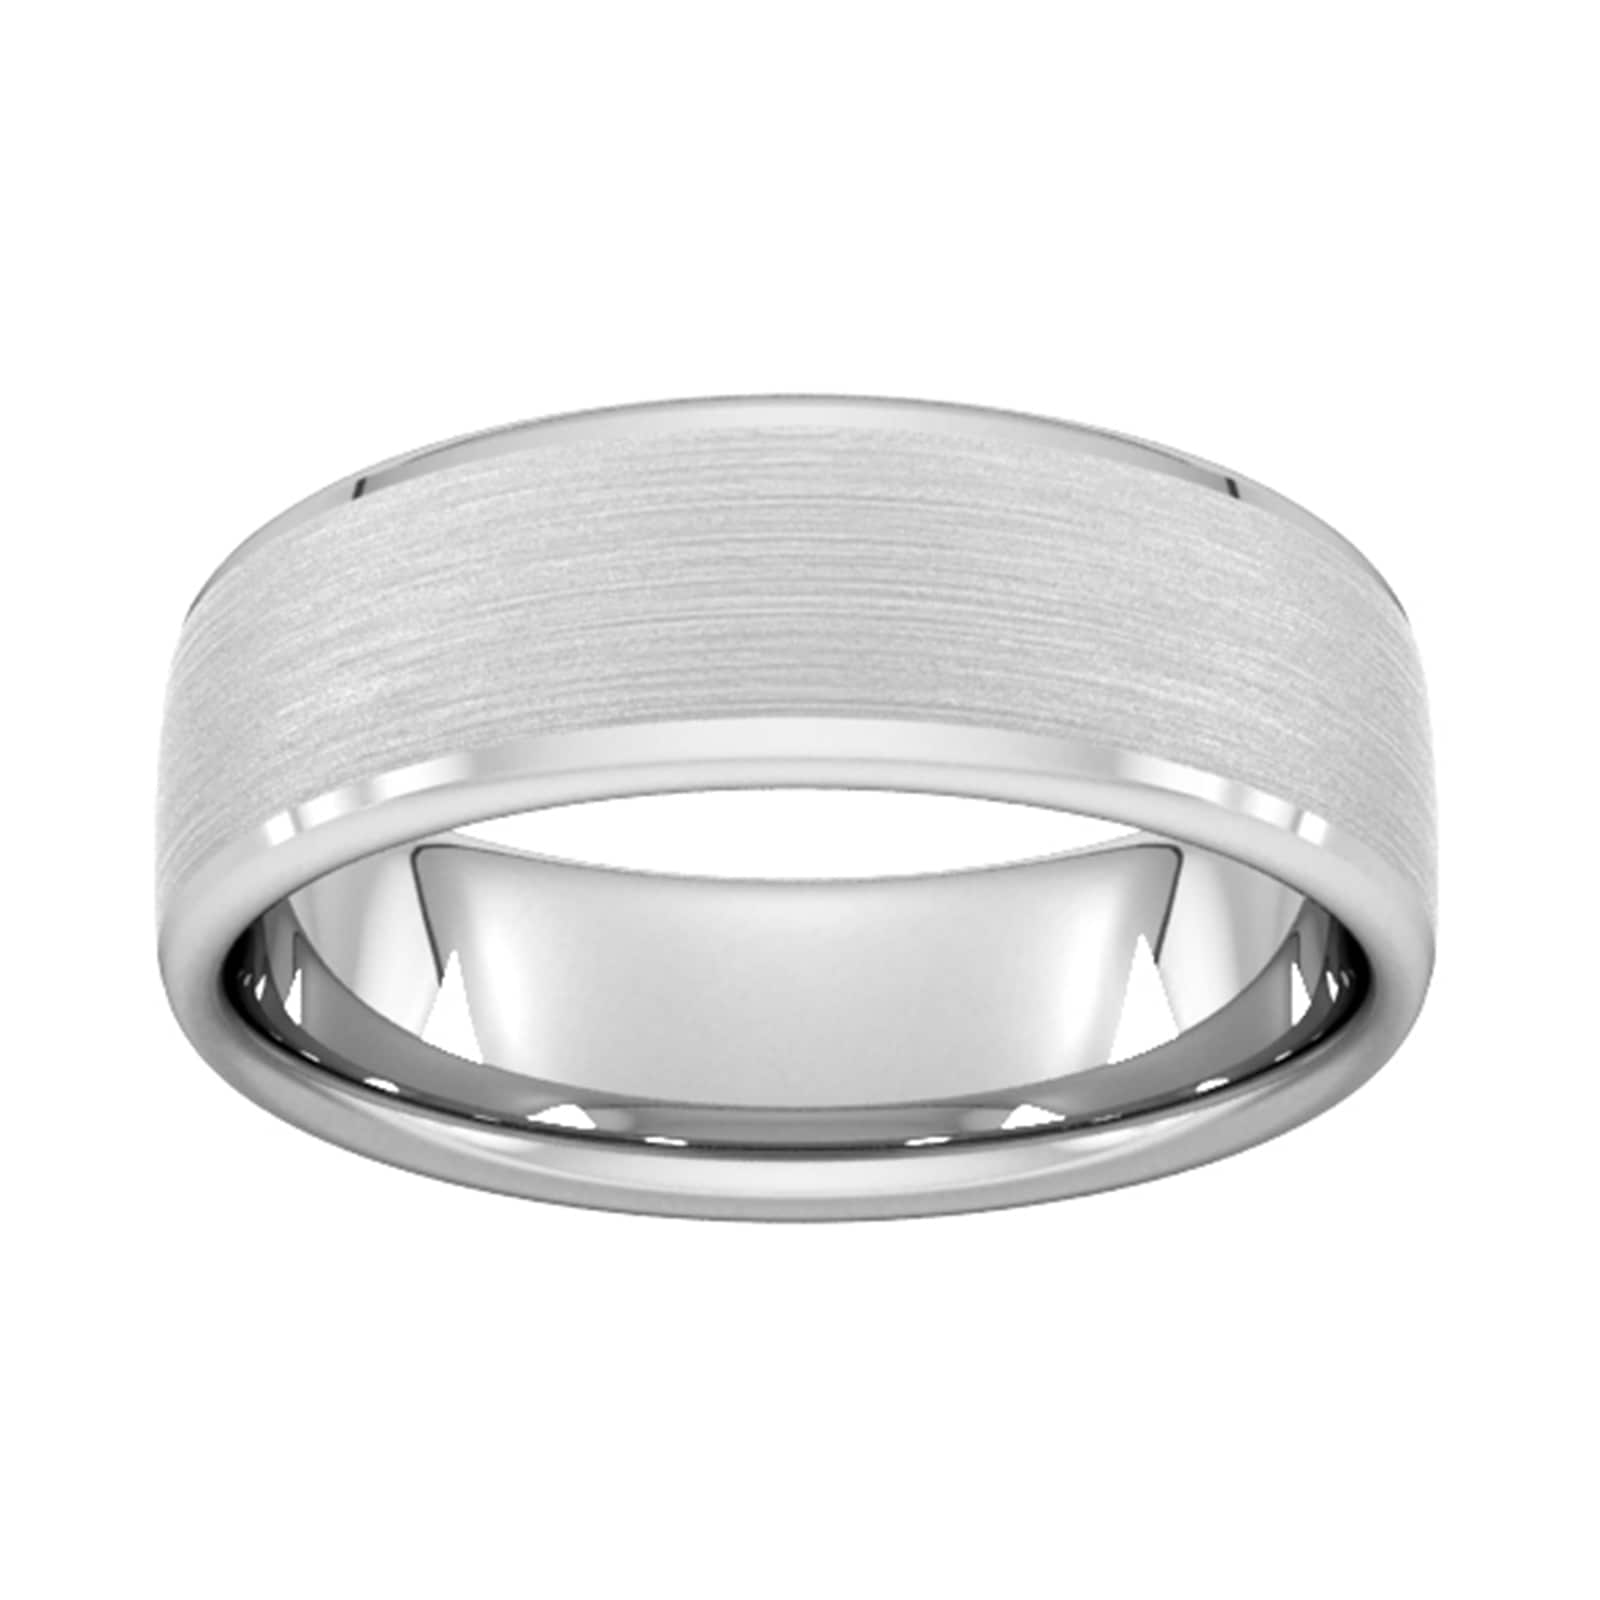 7mm Slight Court Heavy Polished Chamfered Edges With Matt Centre Wedding Ring In 18 Carat White Gold - Ring Size L